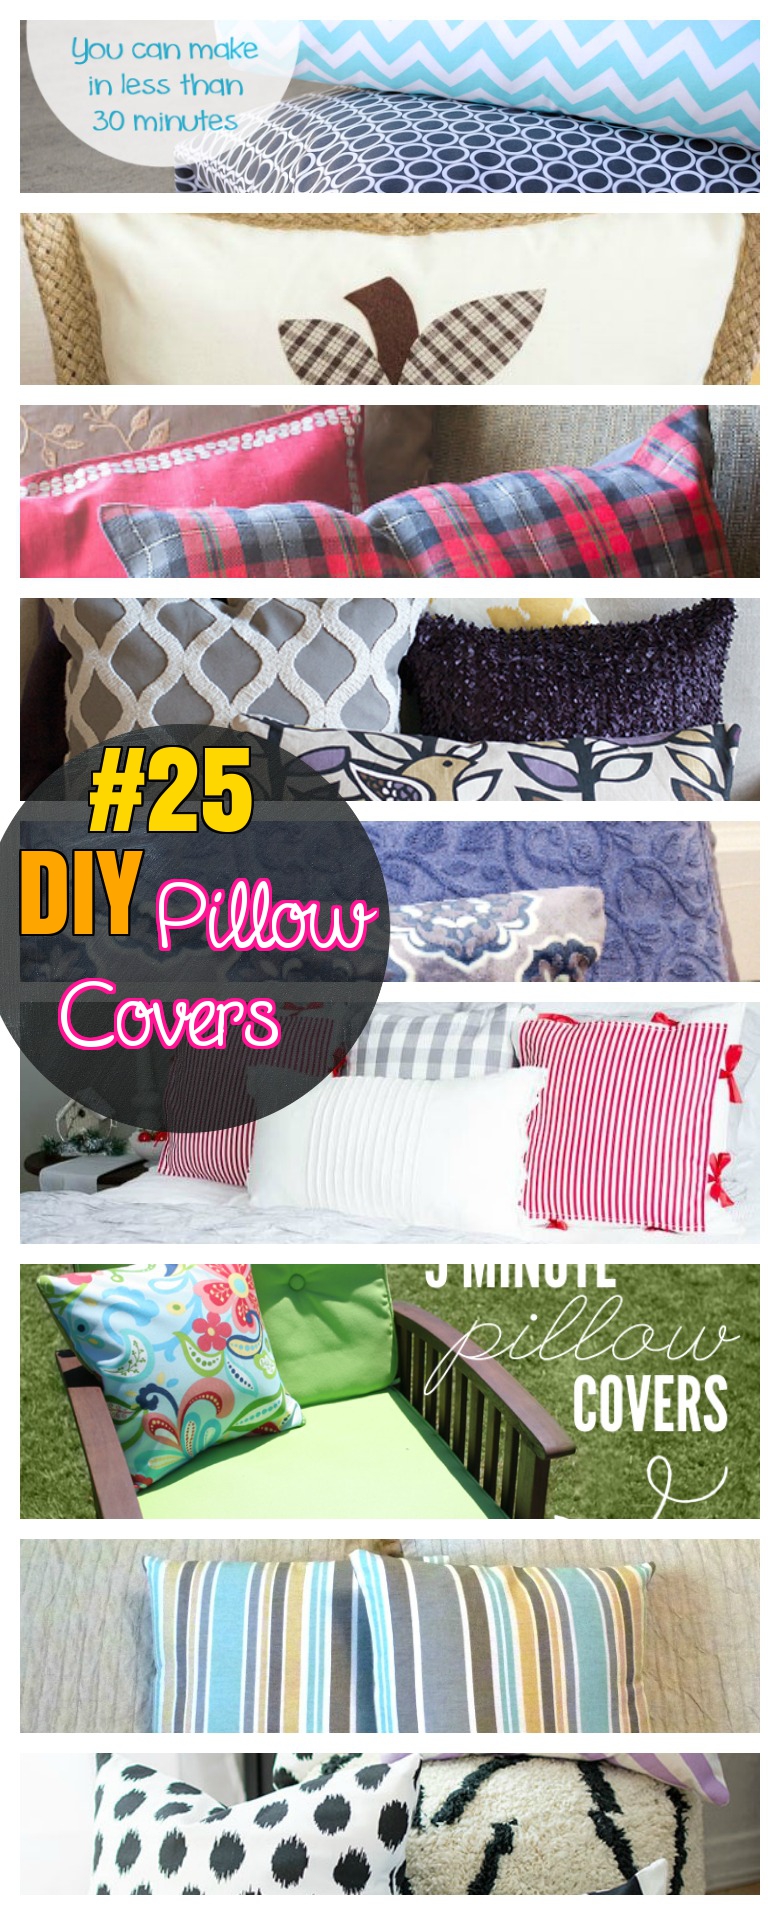 DIY 25 Pillow covers step by step tutorial for pillow case